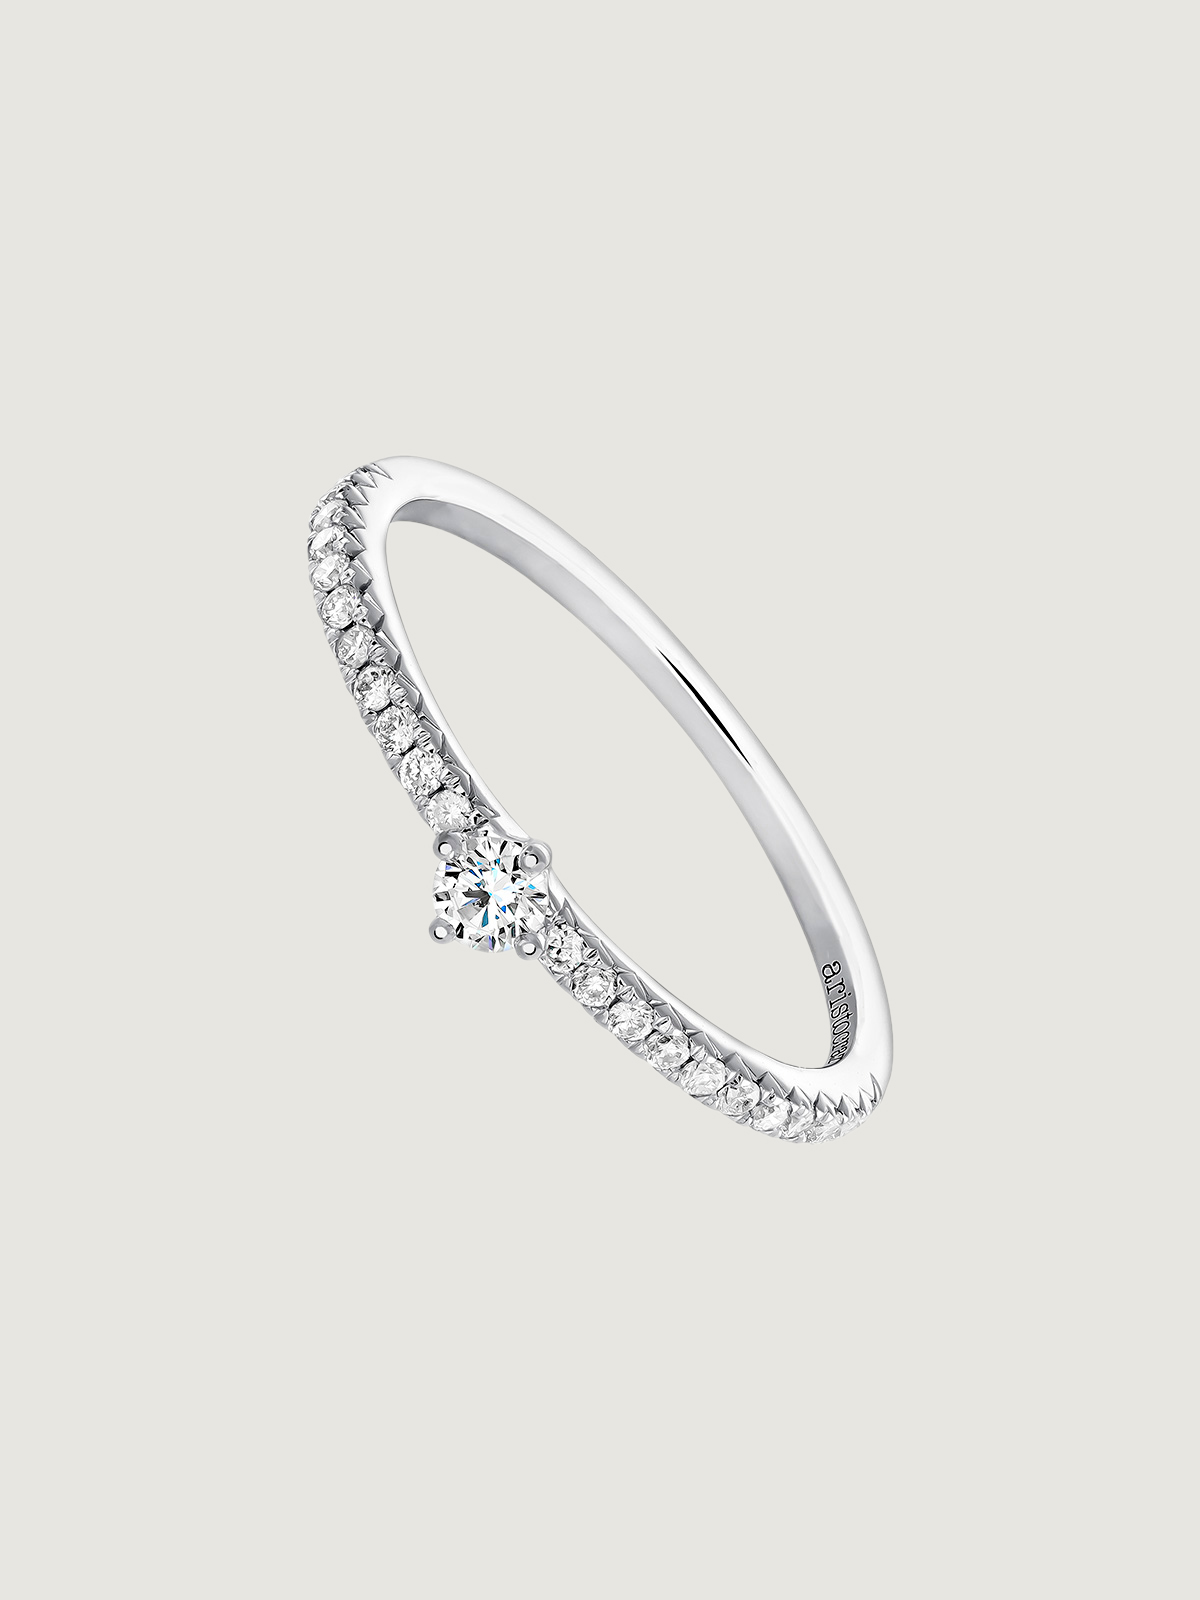 18K white gold ring with diamond arm and 0.23 cts central diamond.